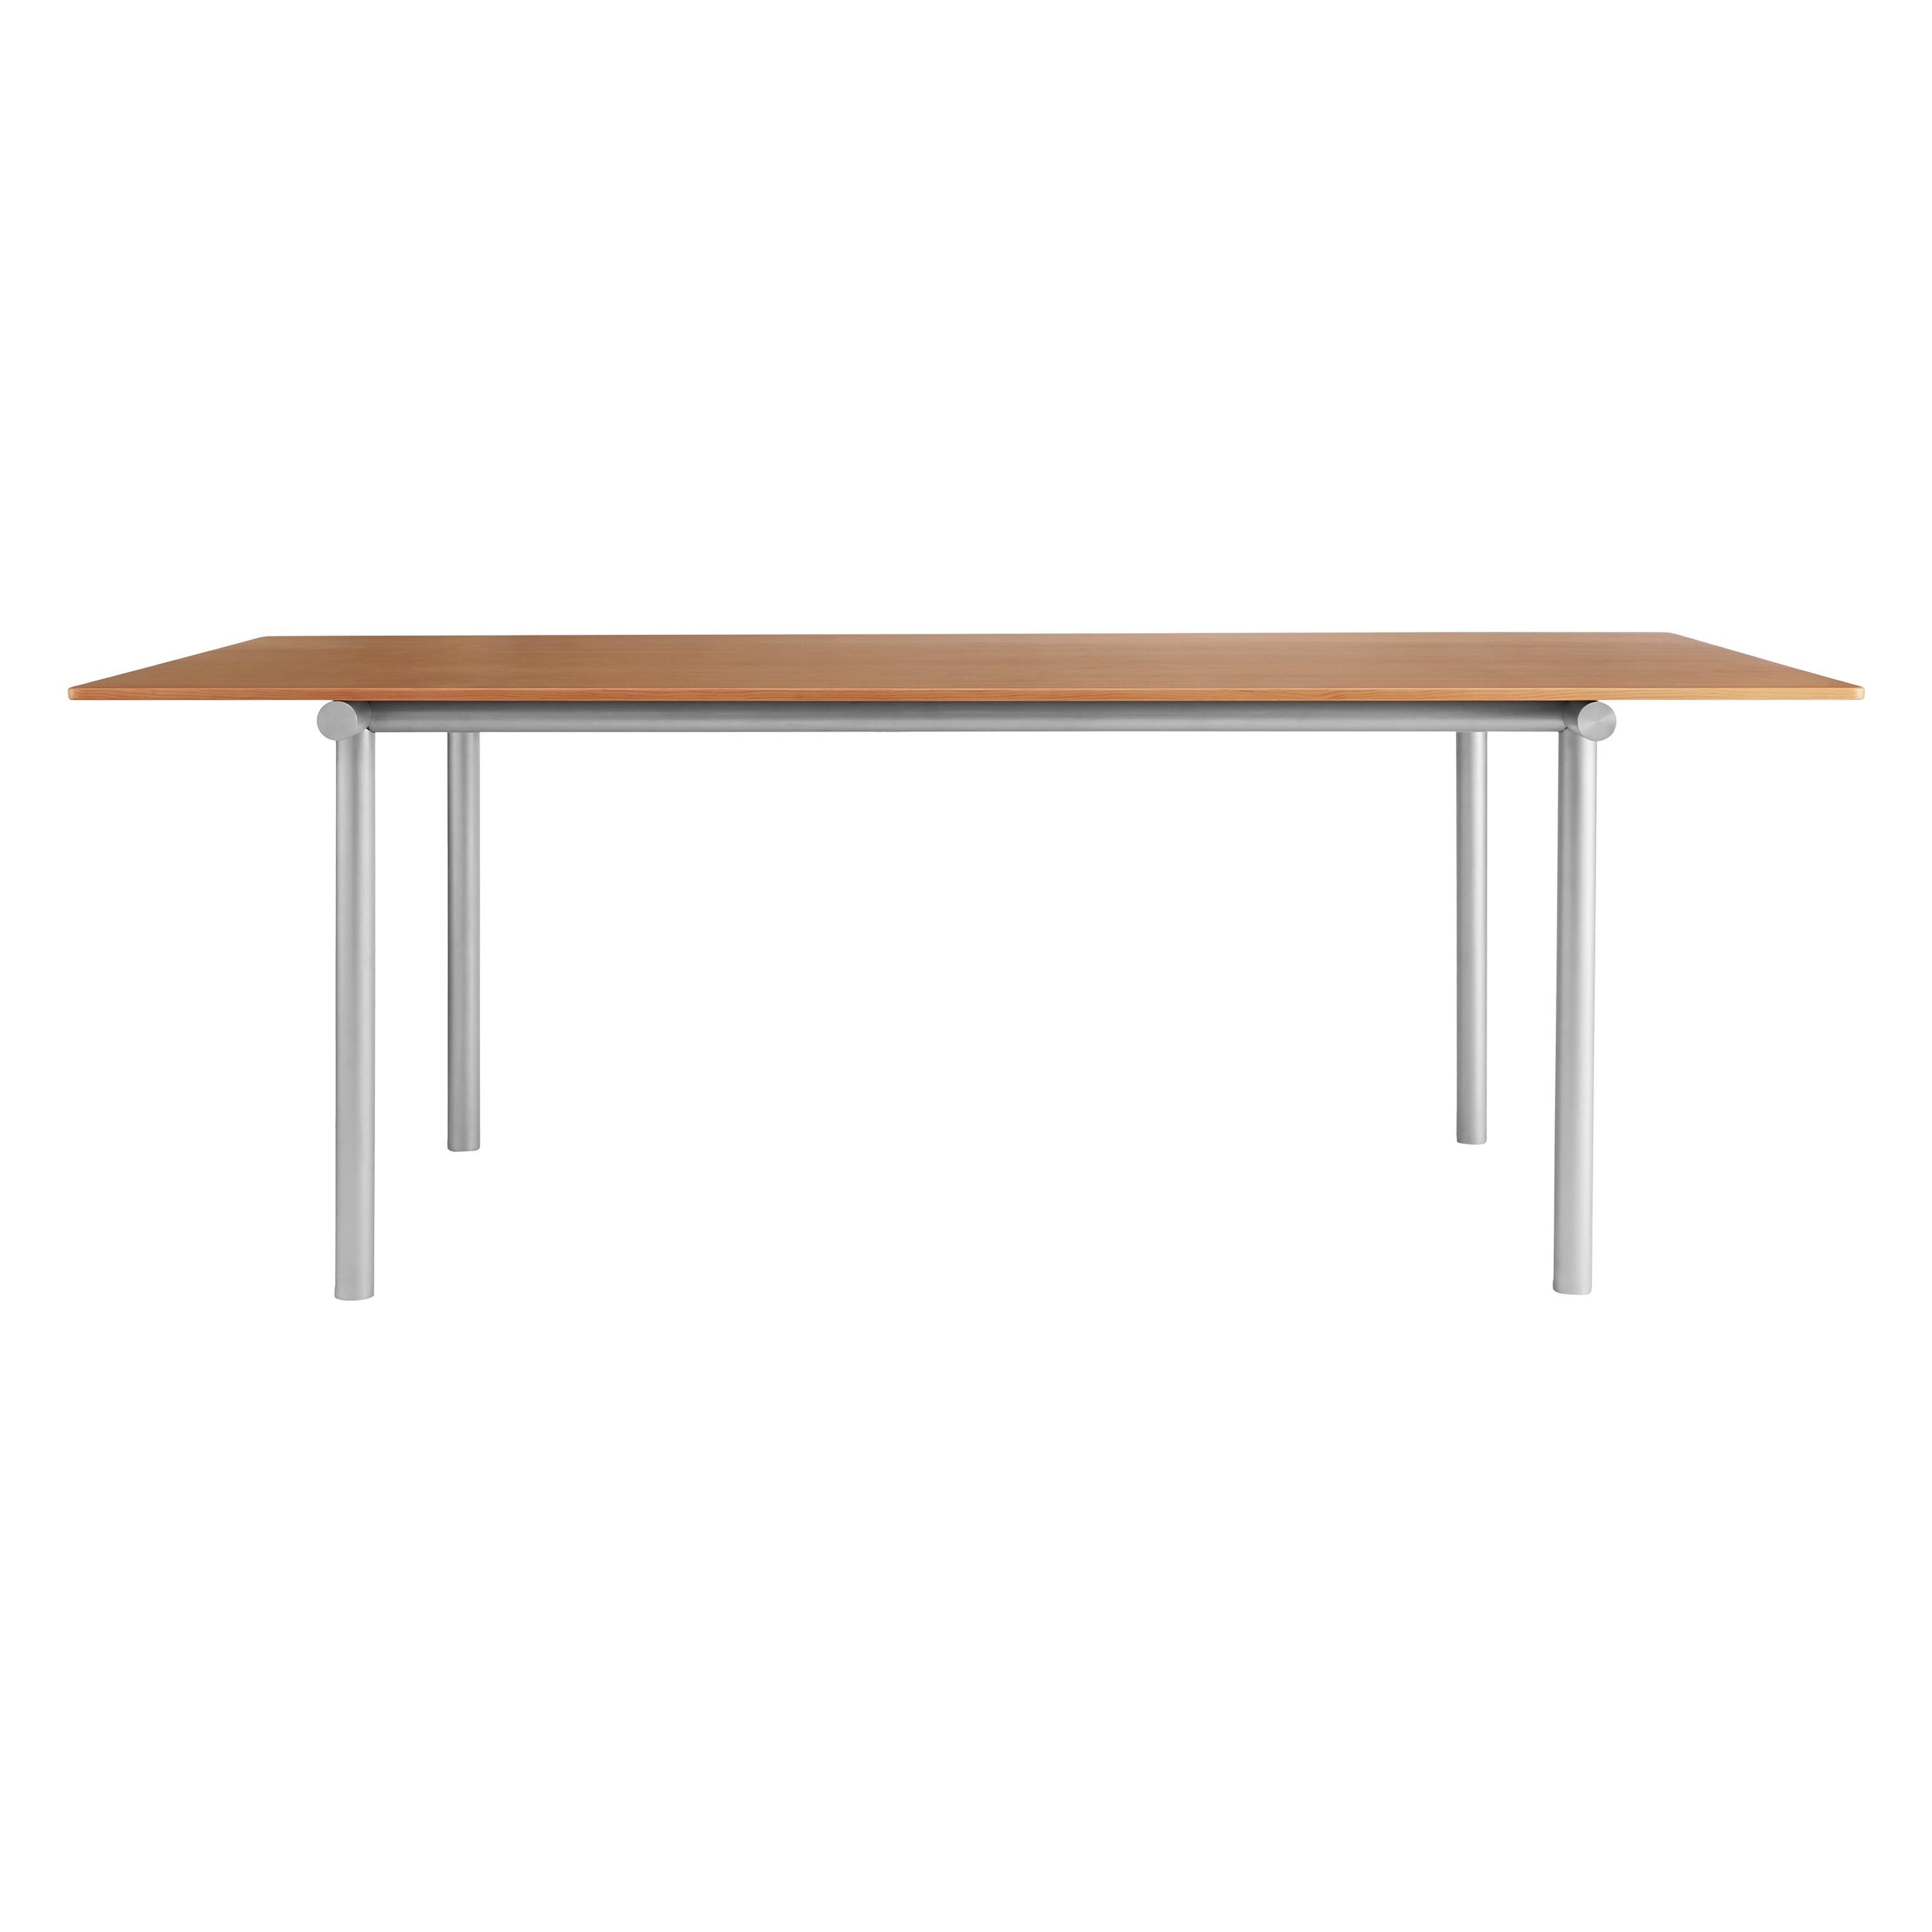 For Sale: Brown (Oregon Pine) Tubby Tube Long Conference Table with Aluminum Frame by Faye Toogood